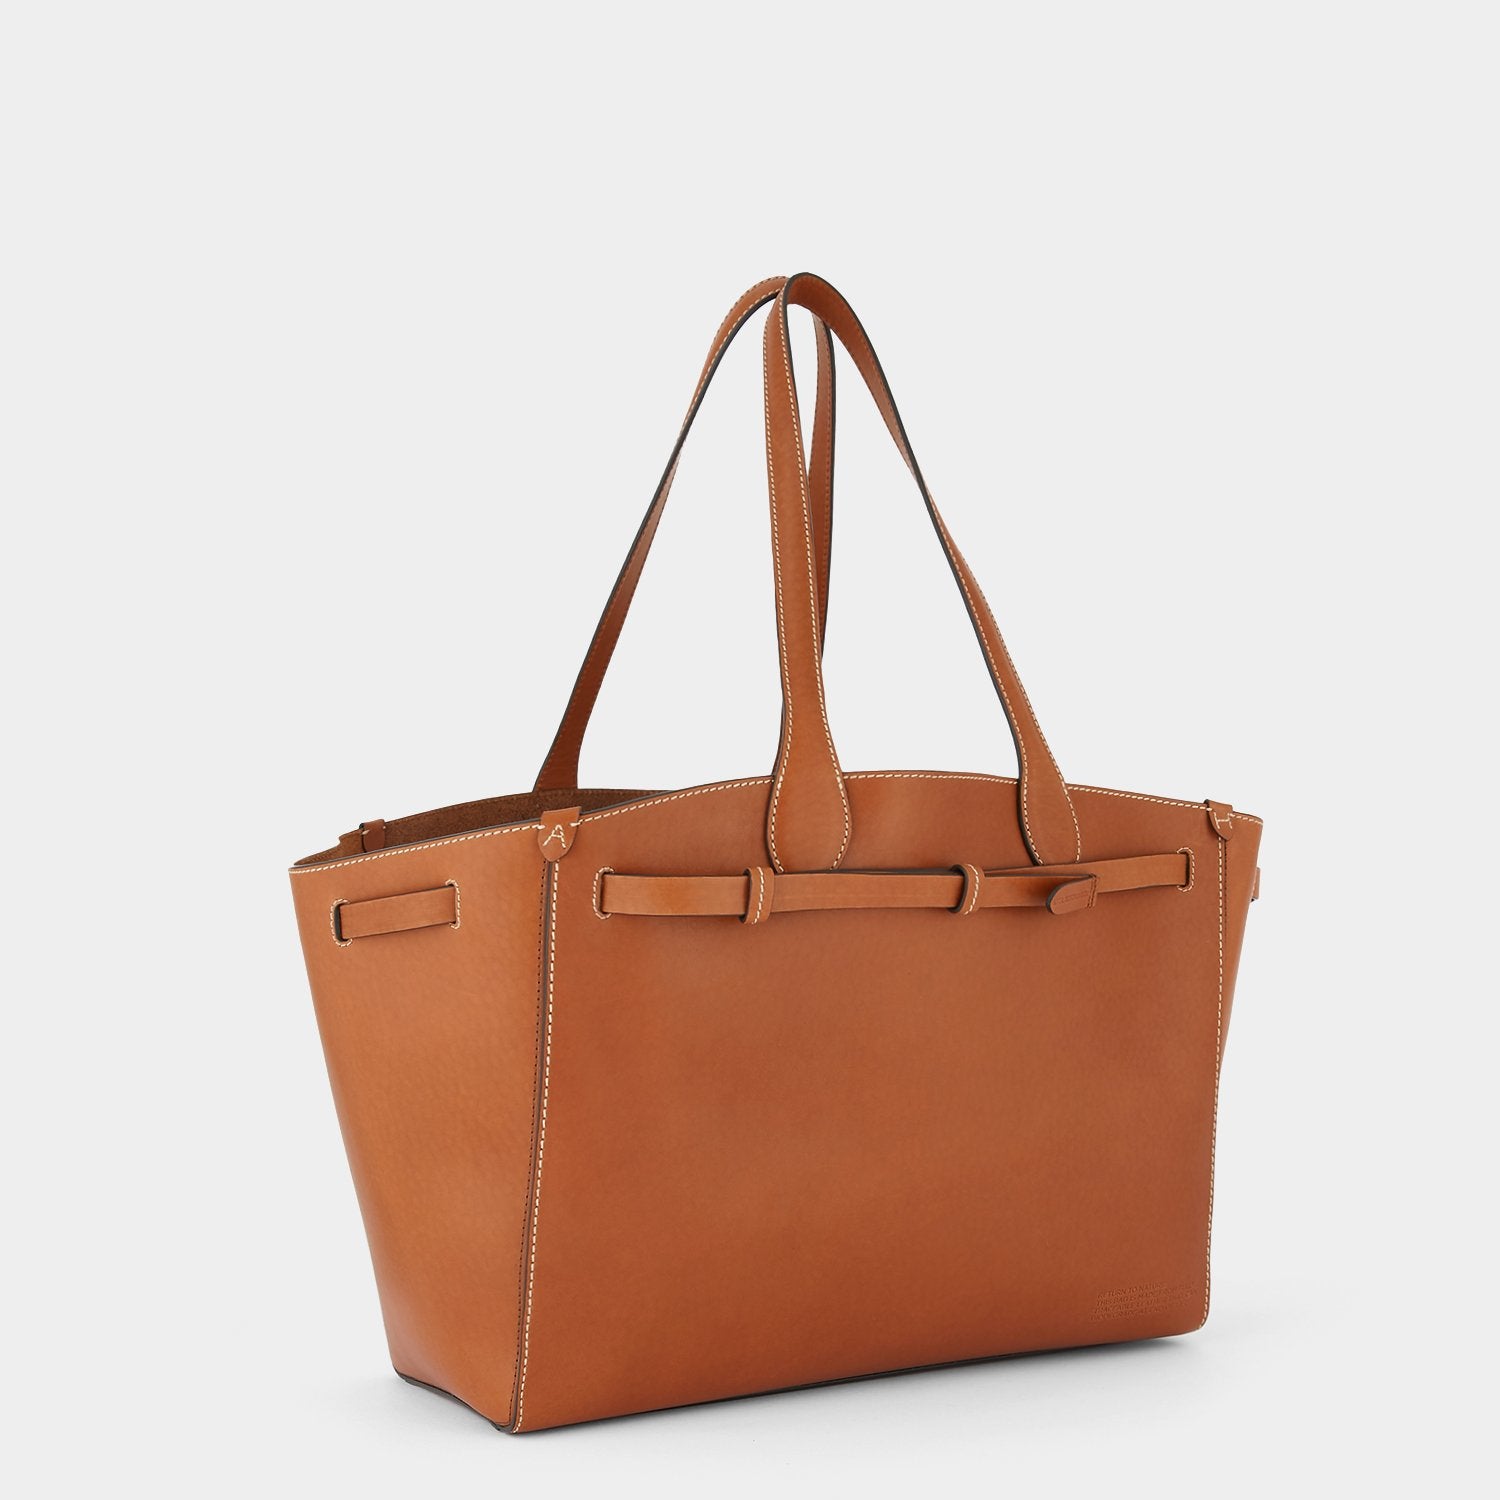 「Return to Nature」 トート -

                  
                    Compostable Leather in Tan -
                  

                  Anya Hindmarch JP
